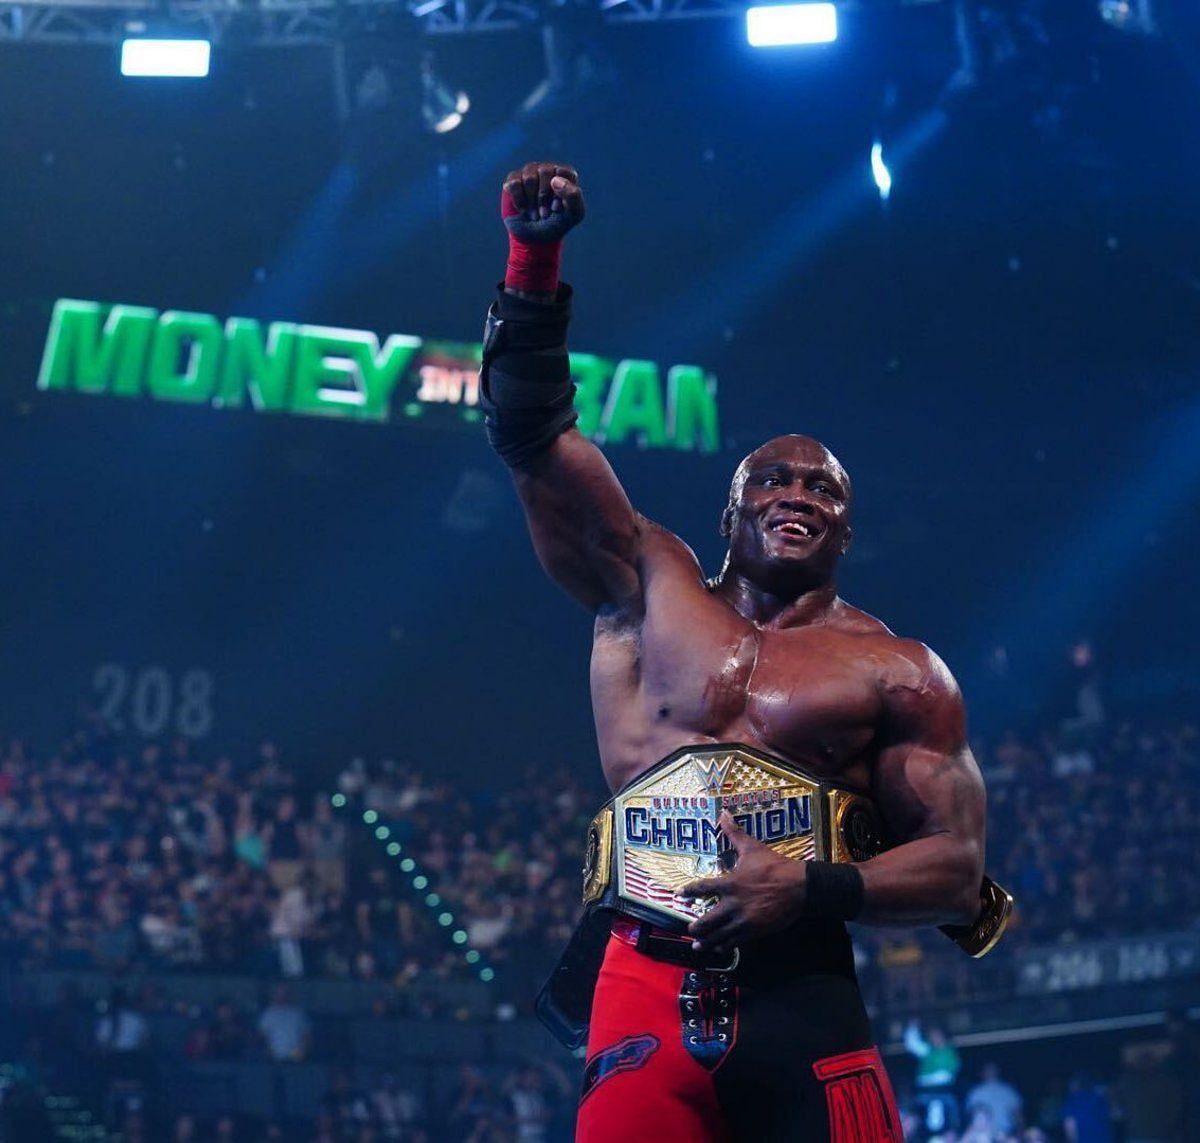 A dominant singles competitor, it is hard to imagine Bobby Lashley ever entering the Tag Team division anytime soon